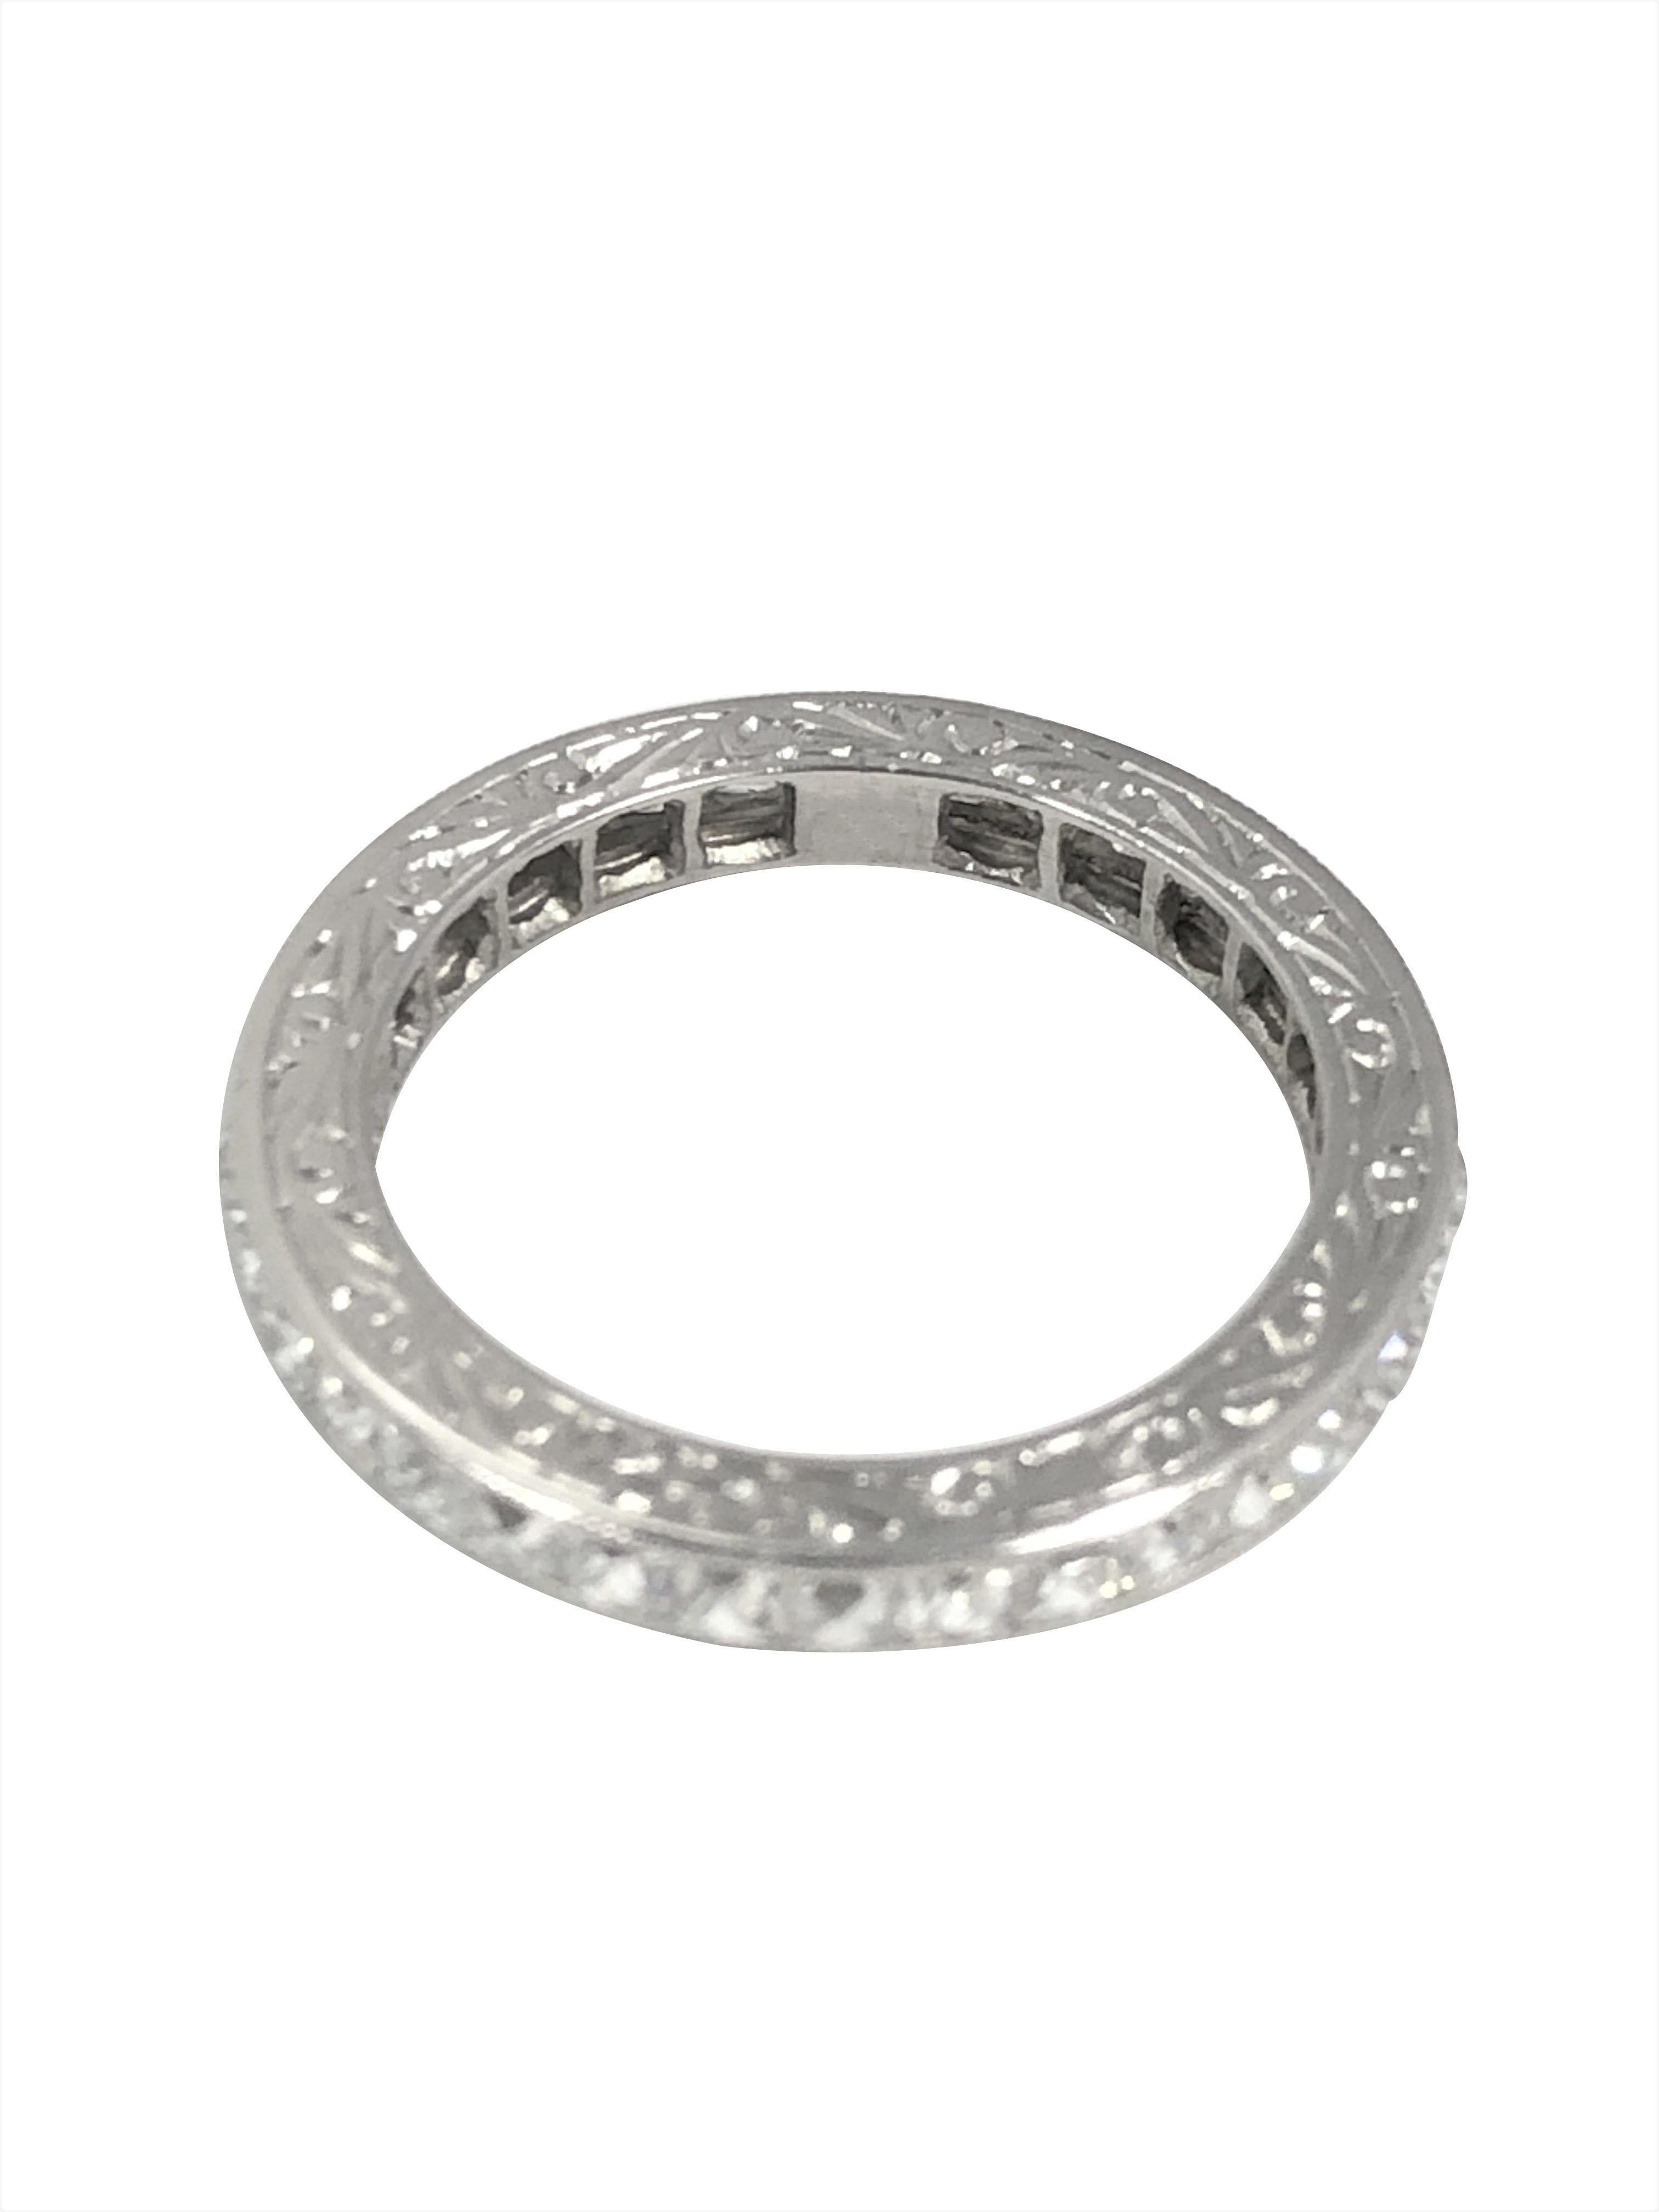 Platinum and 2 Carats French Cut Diamonds Eternity Band Ring In Excellent Condition For Sale In Chicago, IL